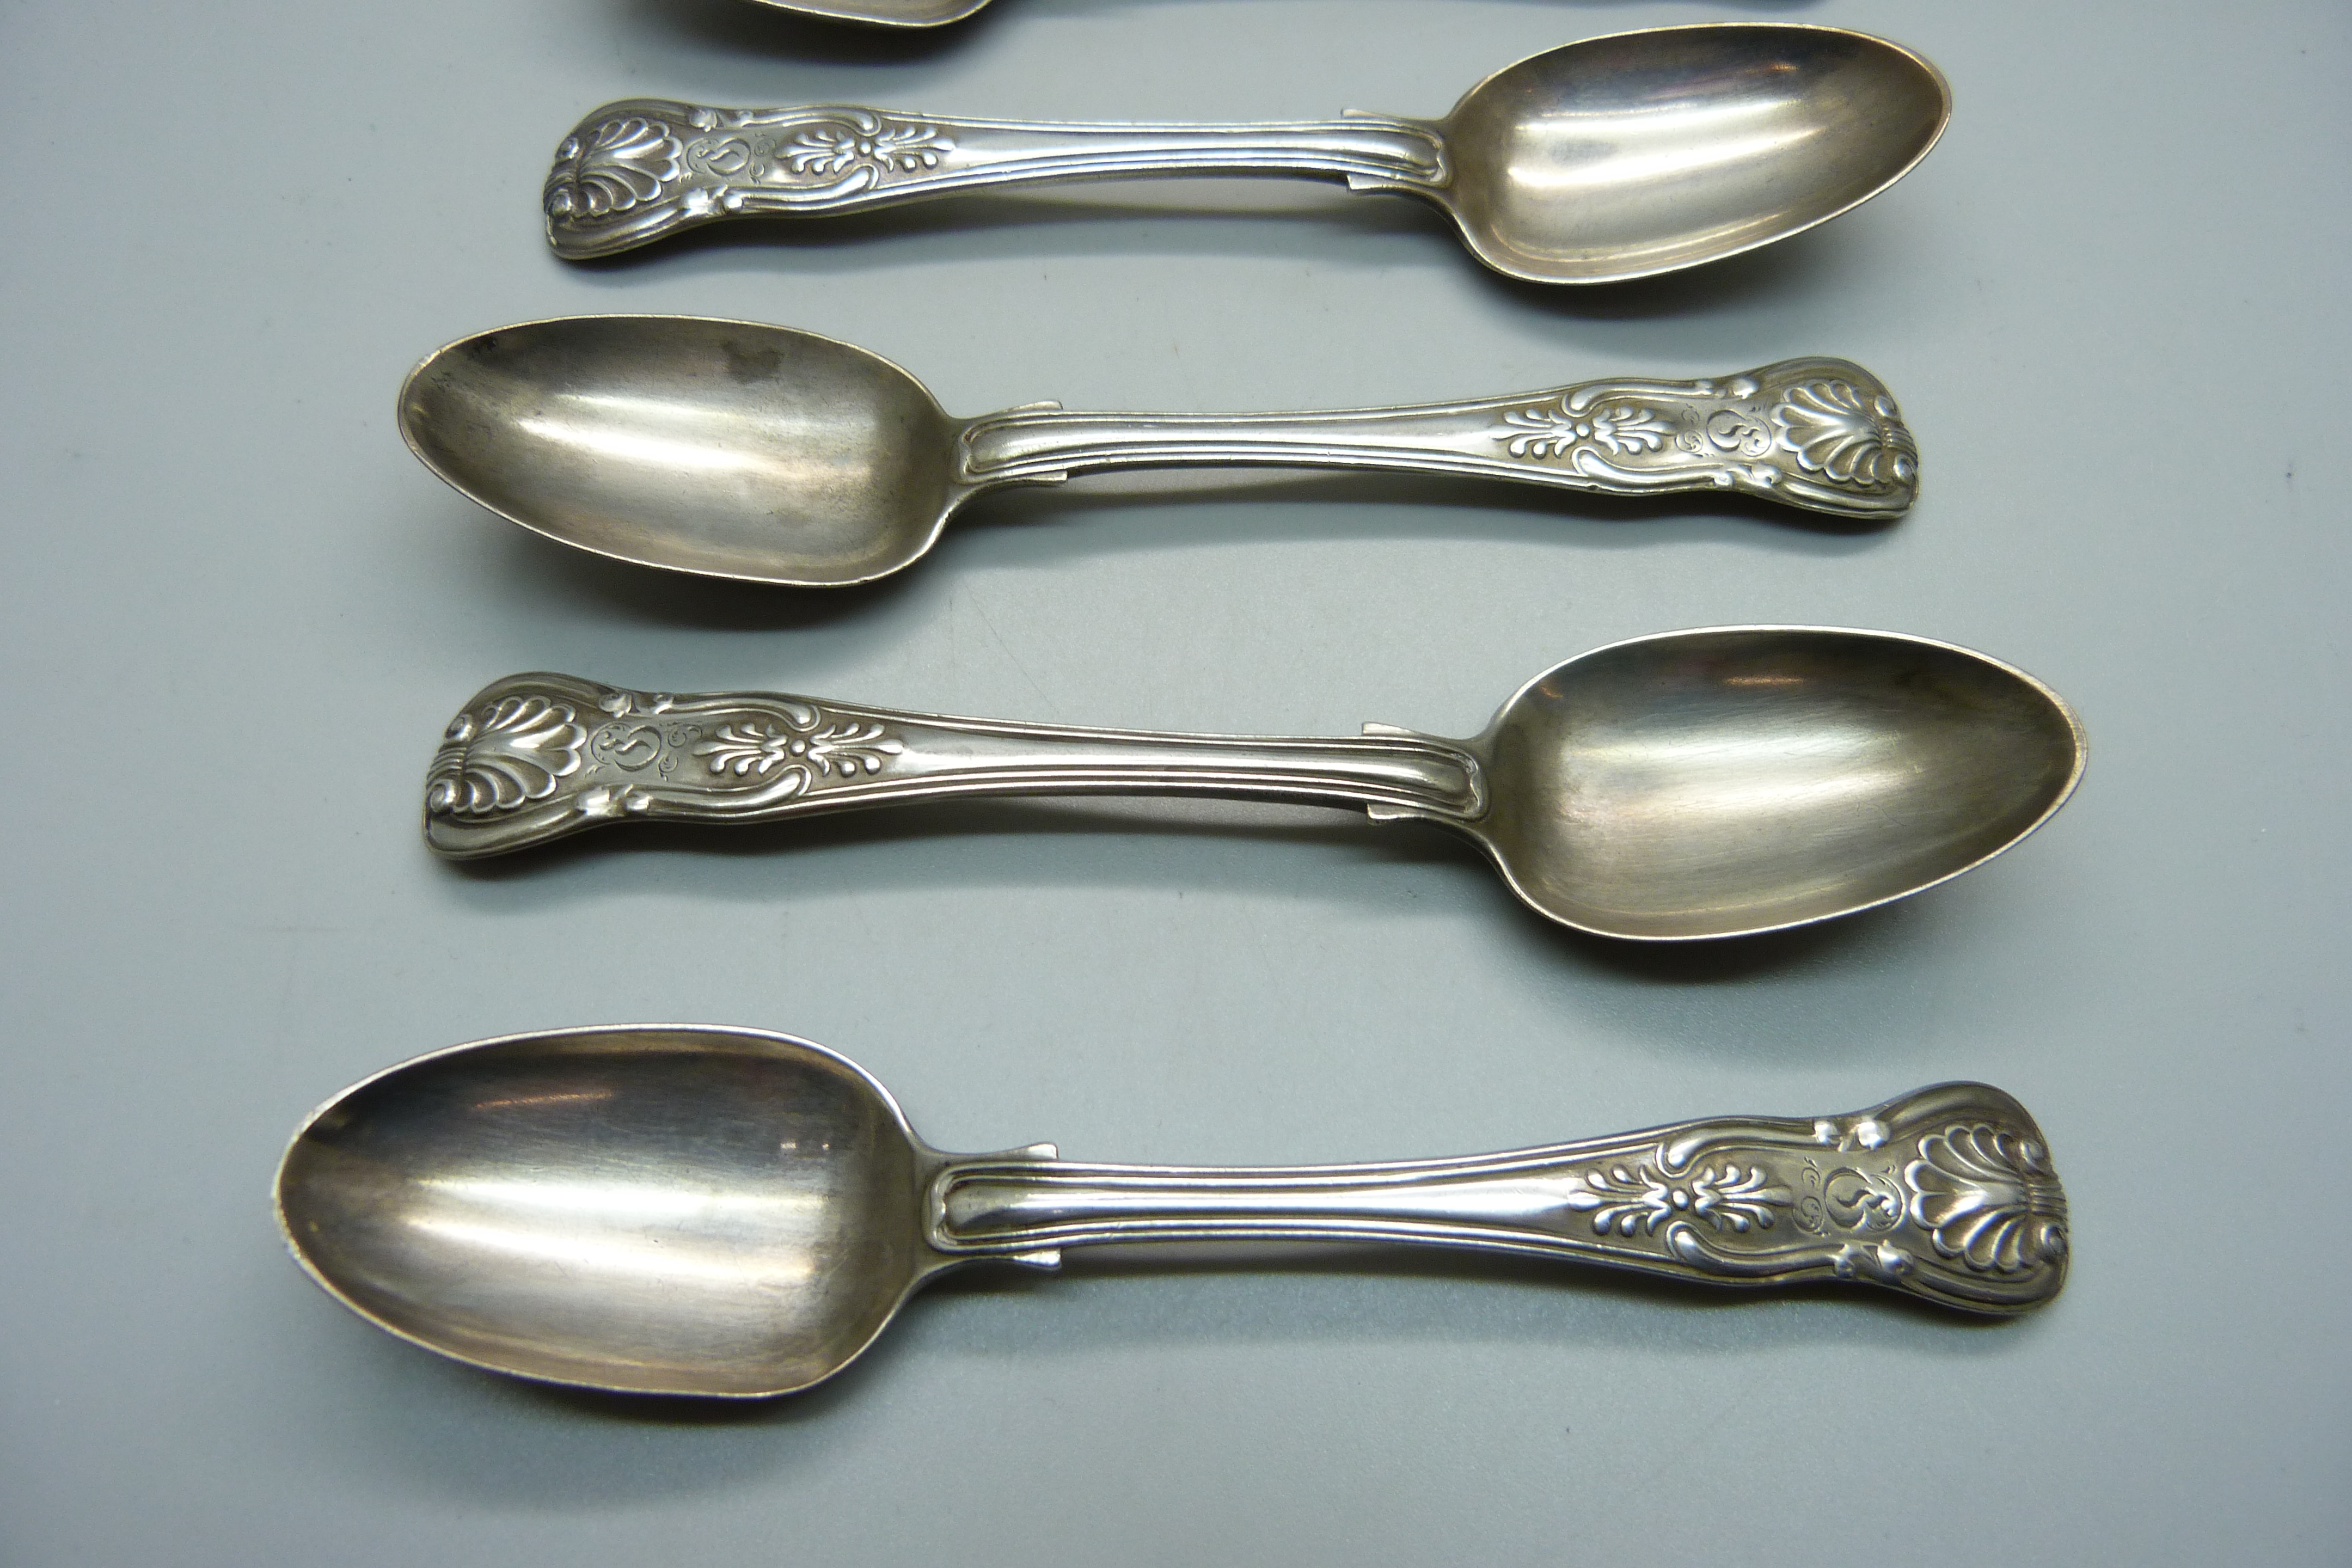 A set of six Victorian silver spoons, William Eaton, London 1843, 206g - Image 2 of 5